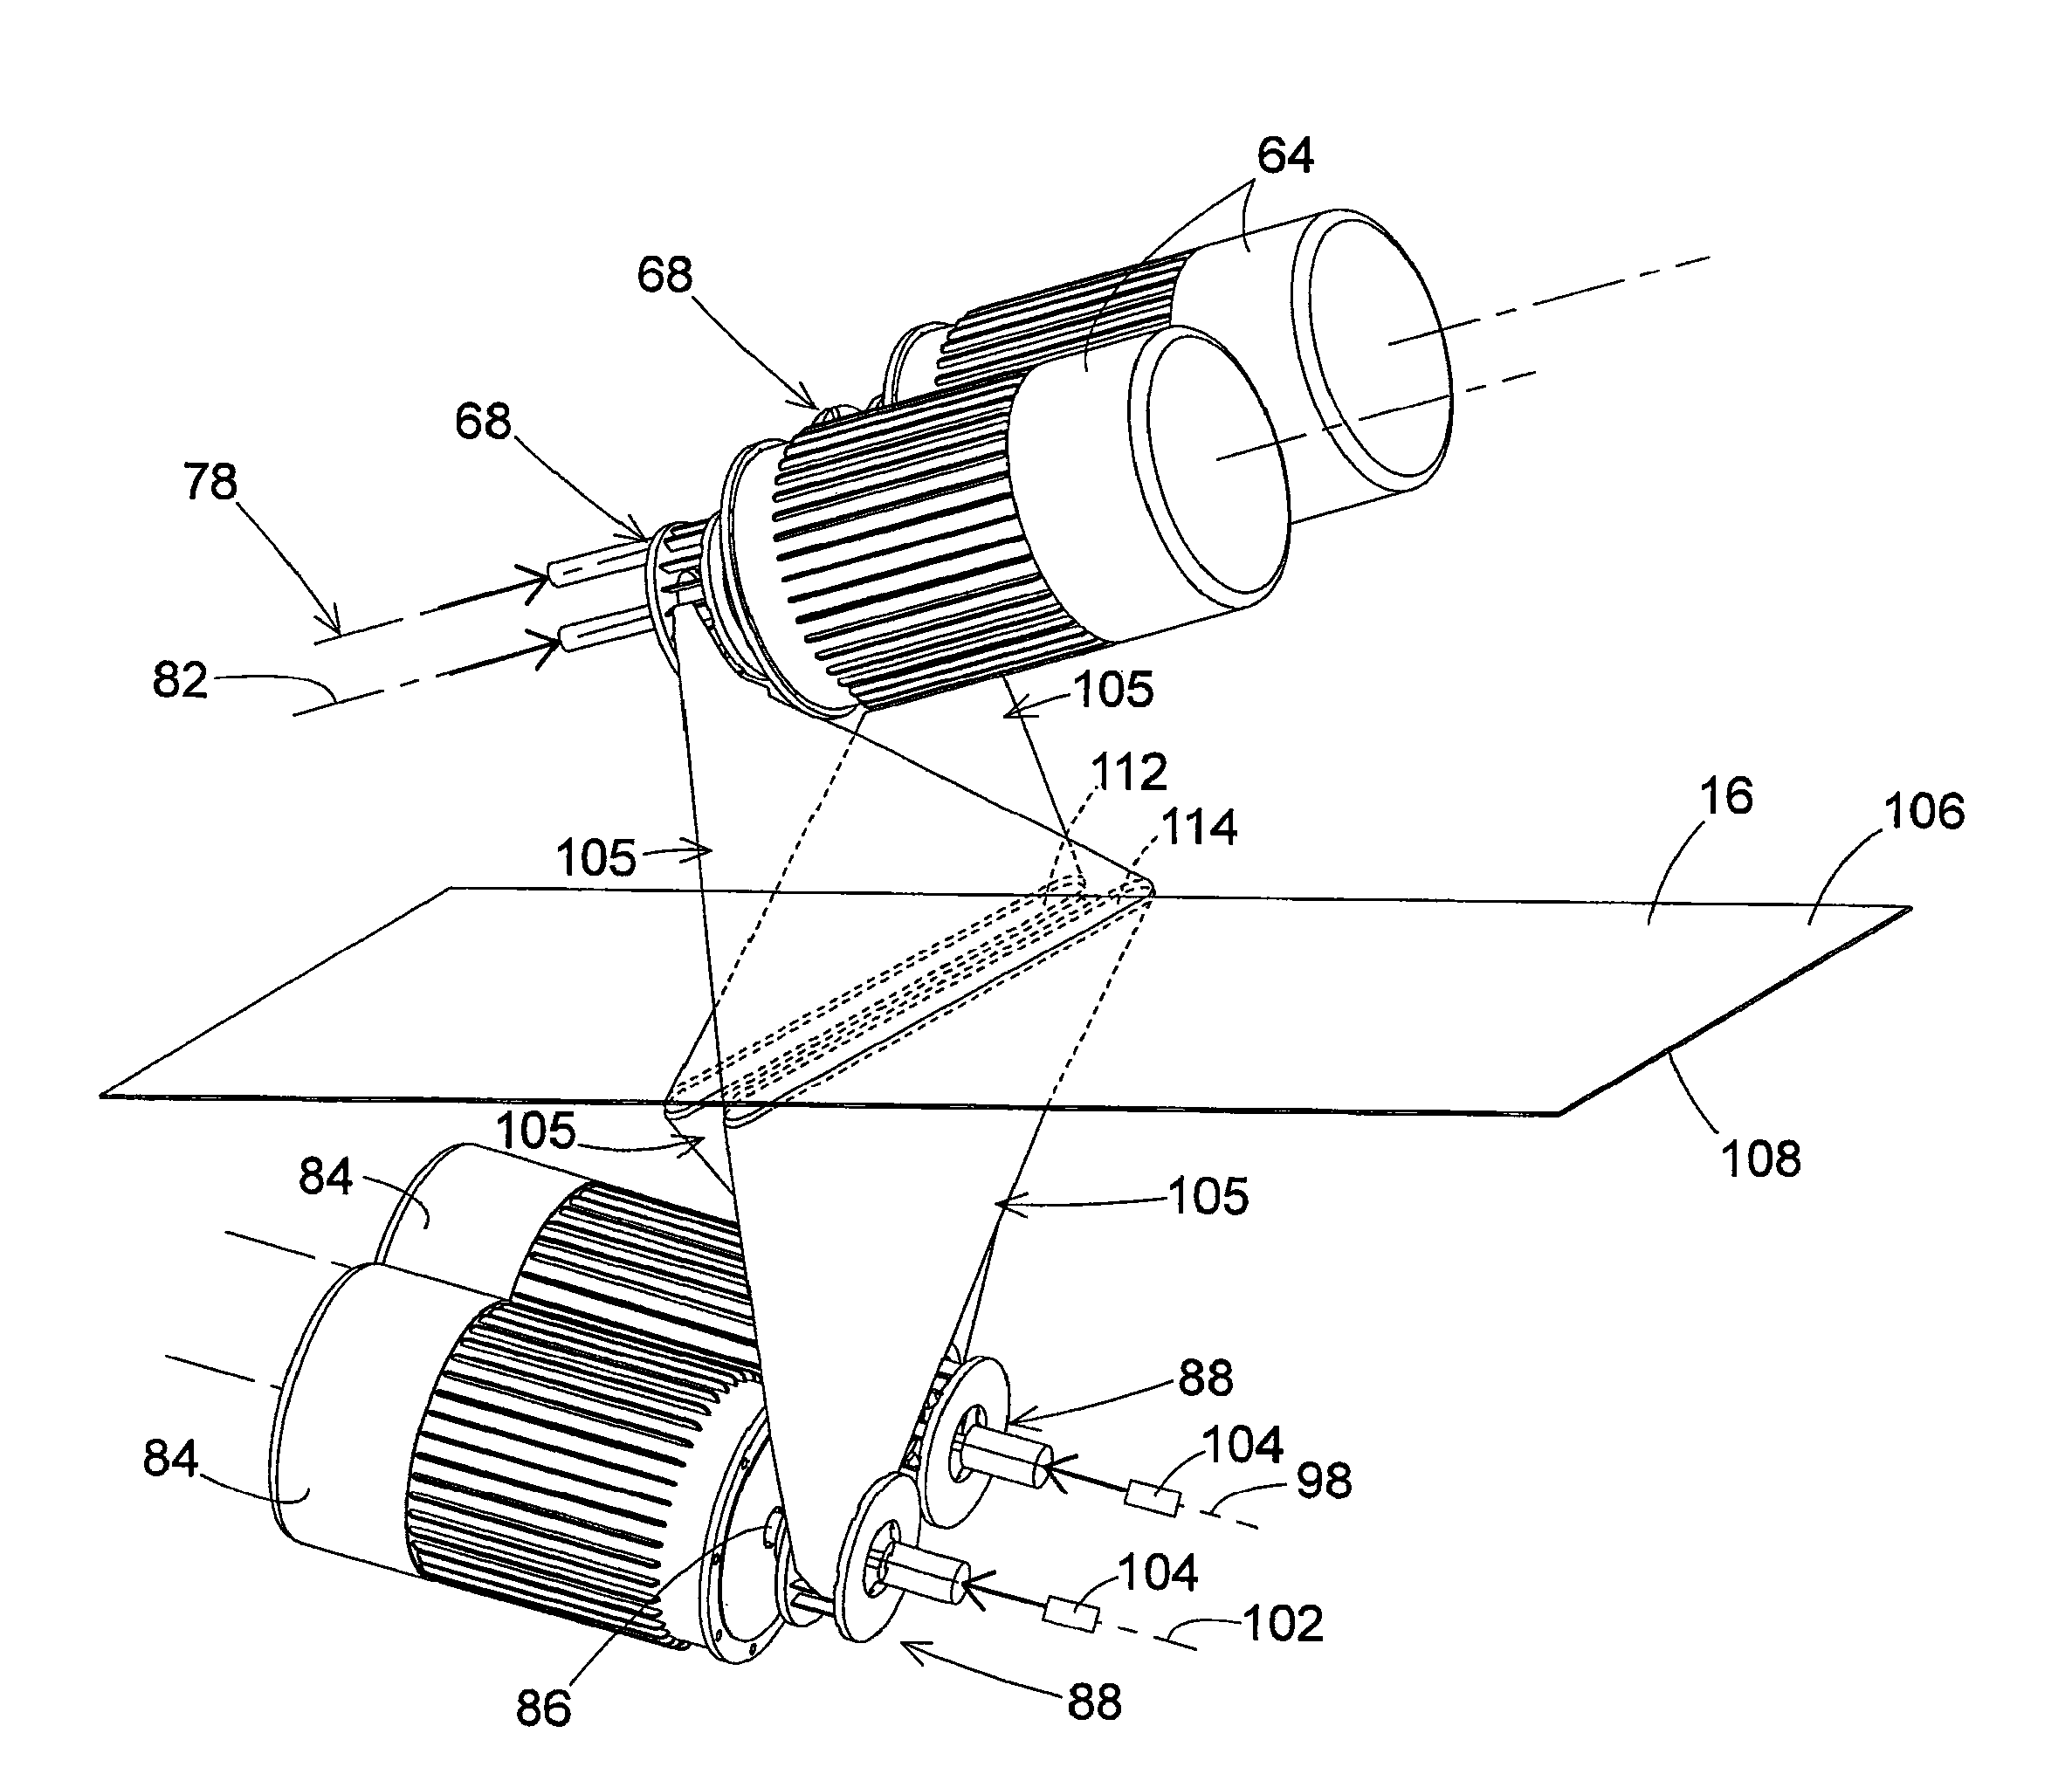 Method of producing rust inhibitive sheet metal through scale removal with a slurry blasting descaling cell having improved grit flow